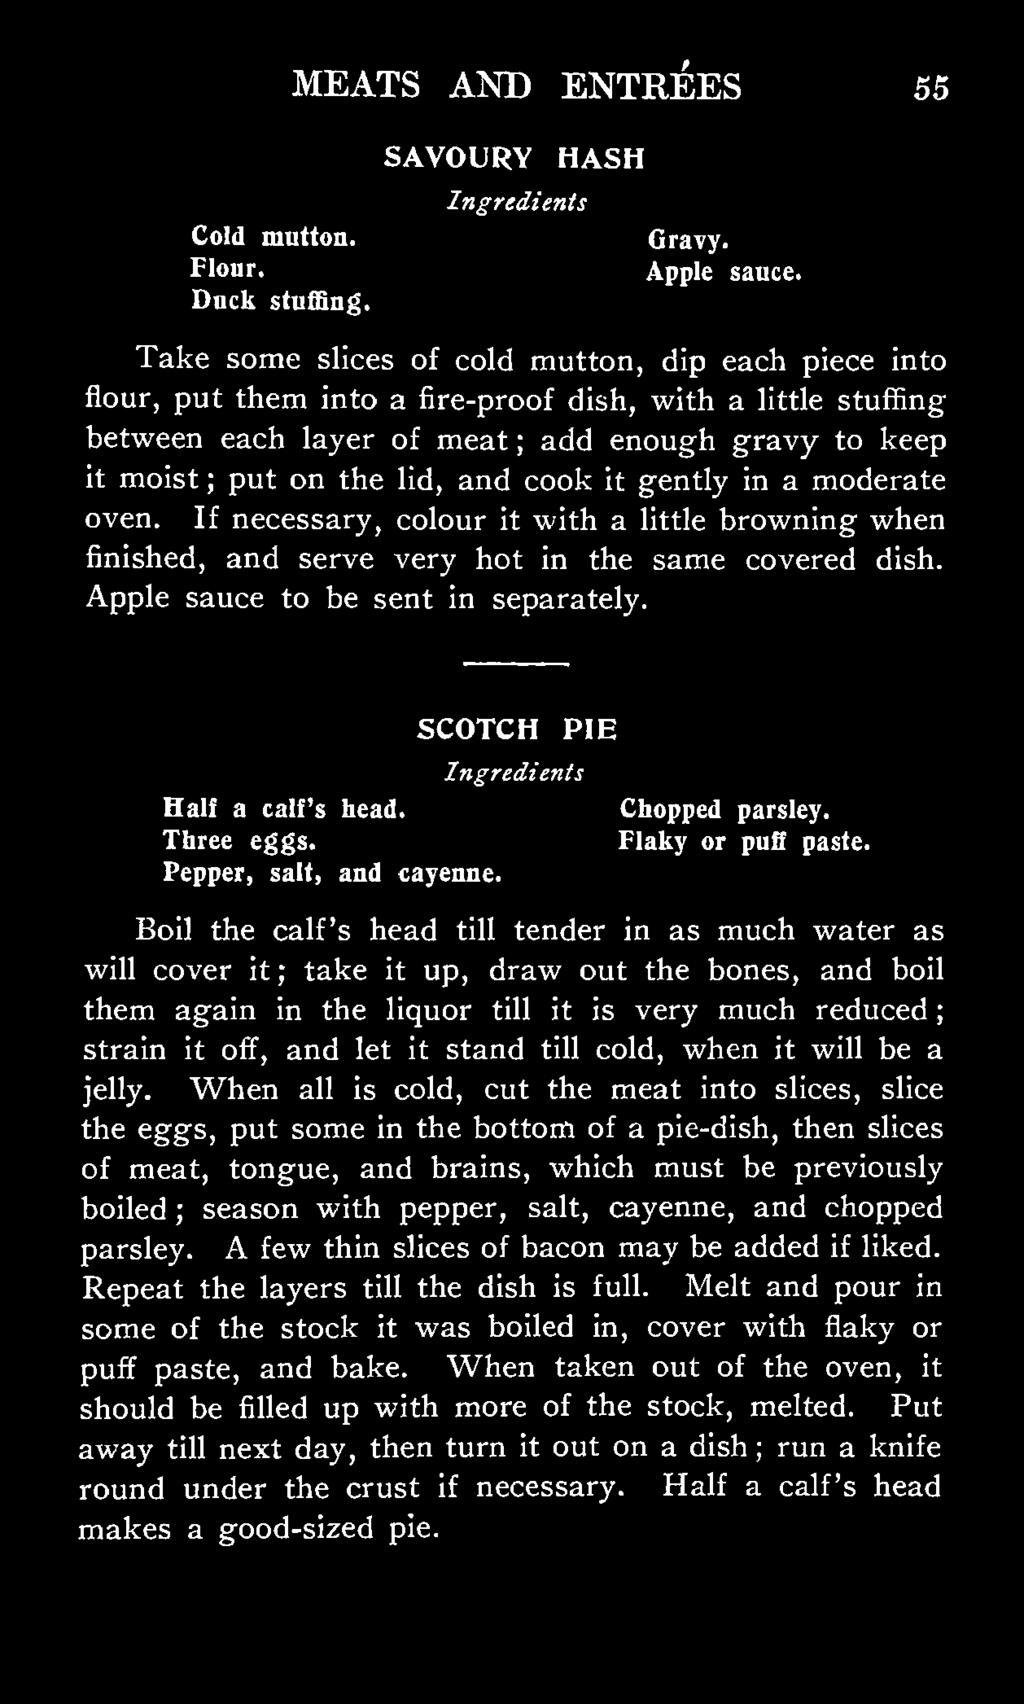 and cook it gently in a moderate oven. If necessary, colour it with a little browning when finished, and serve very hot in the same covered dish. Apple sauce to be sent in separately.